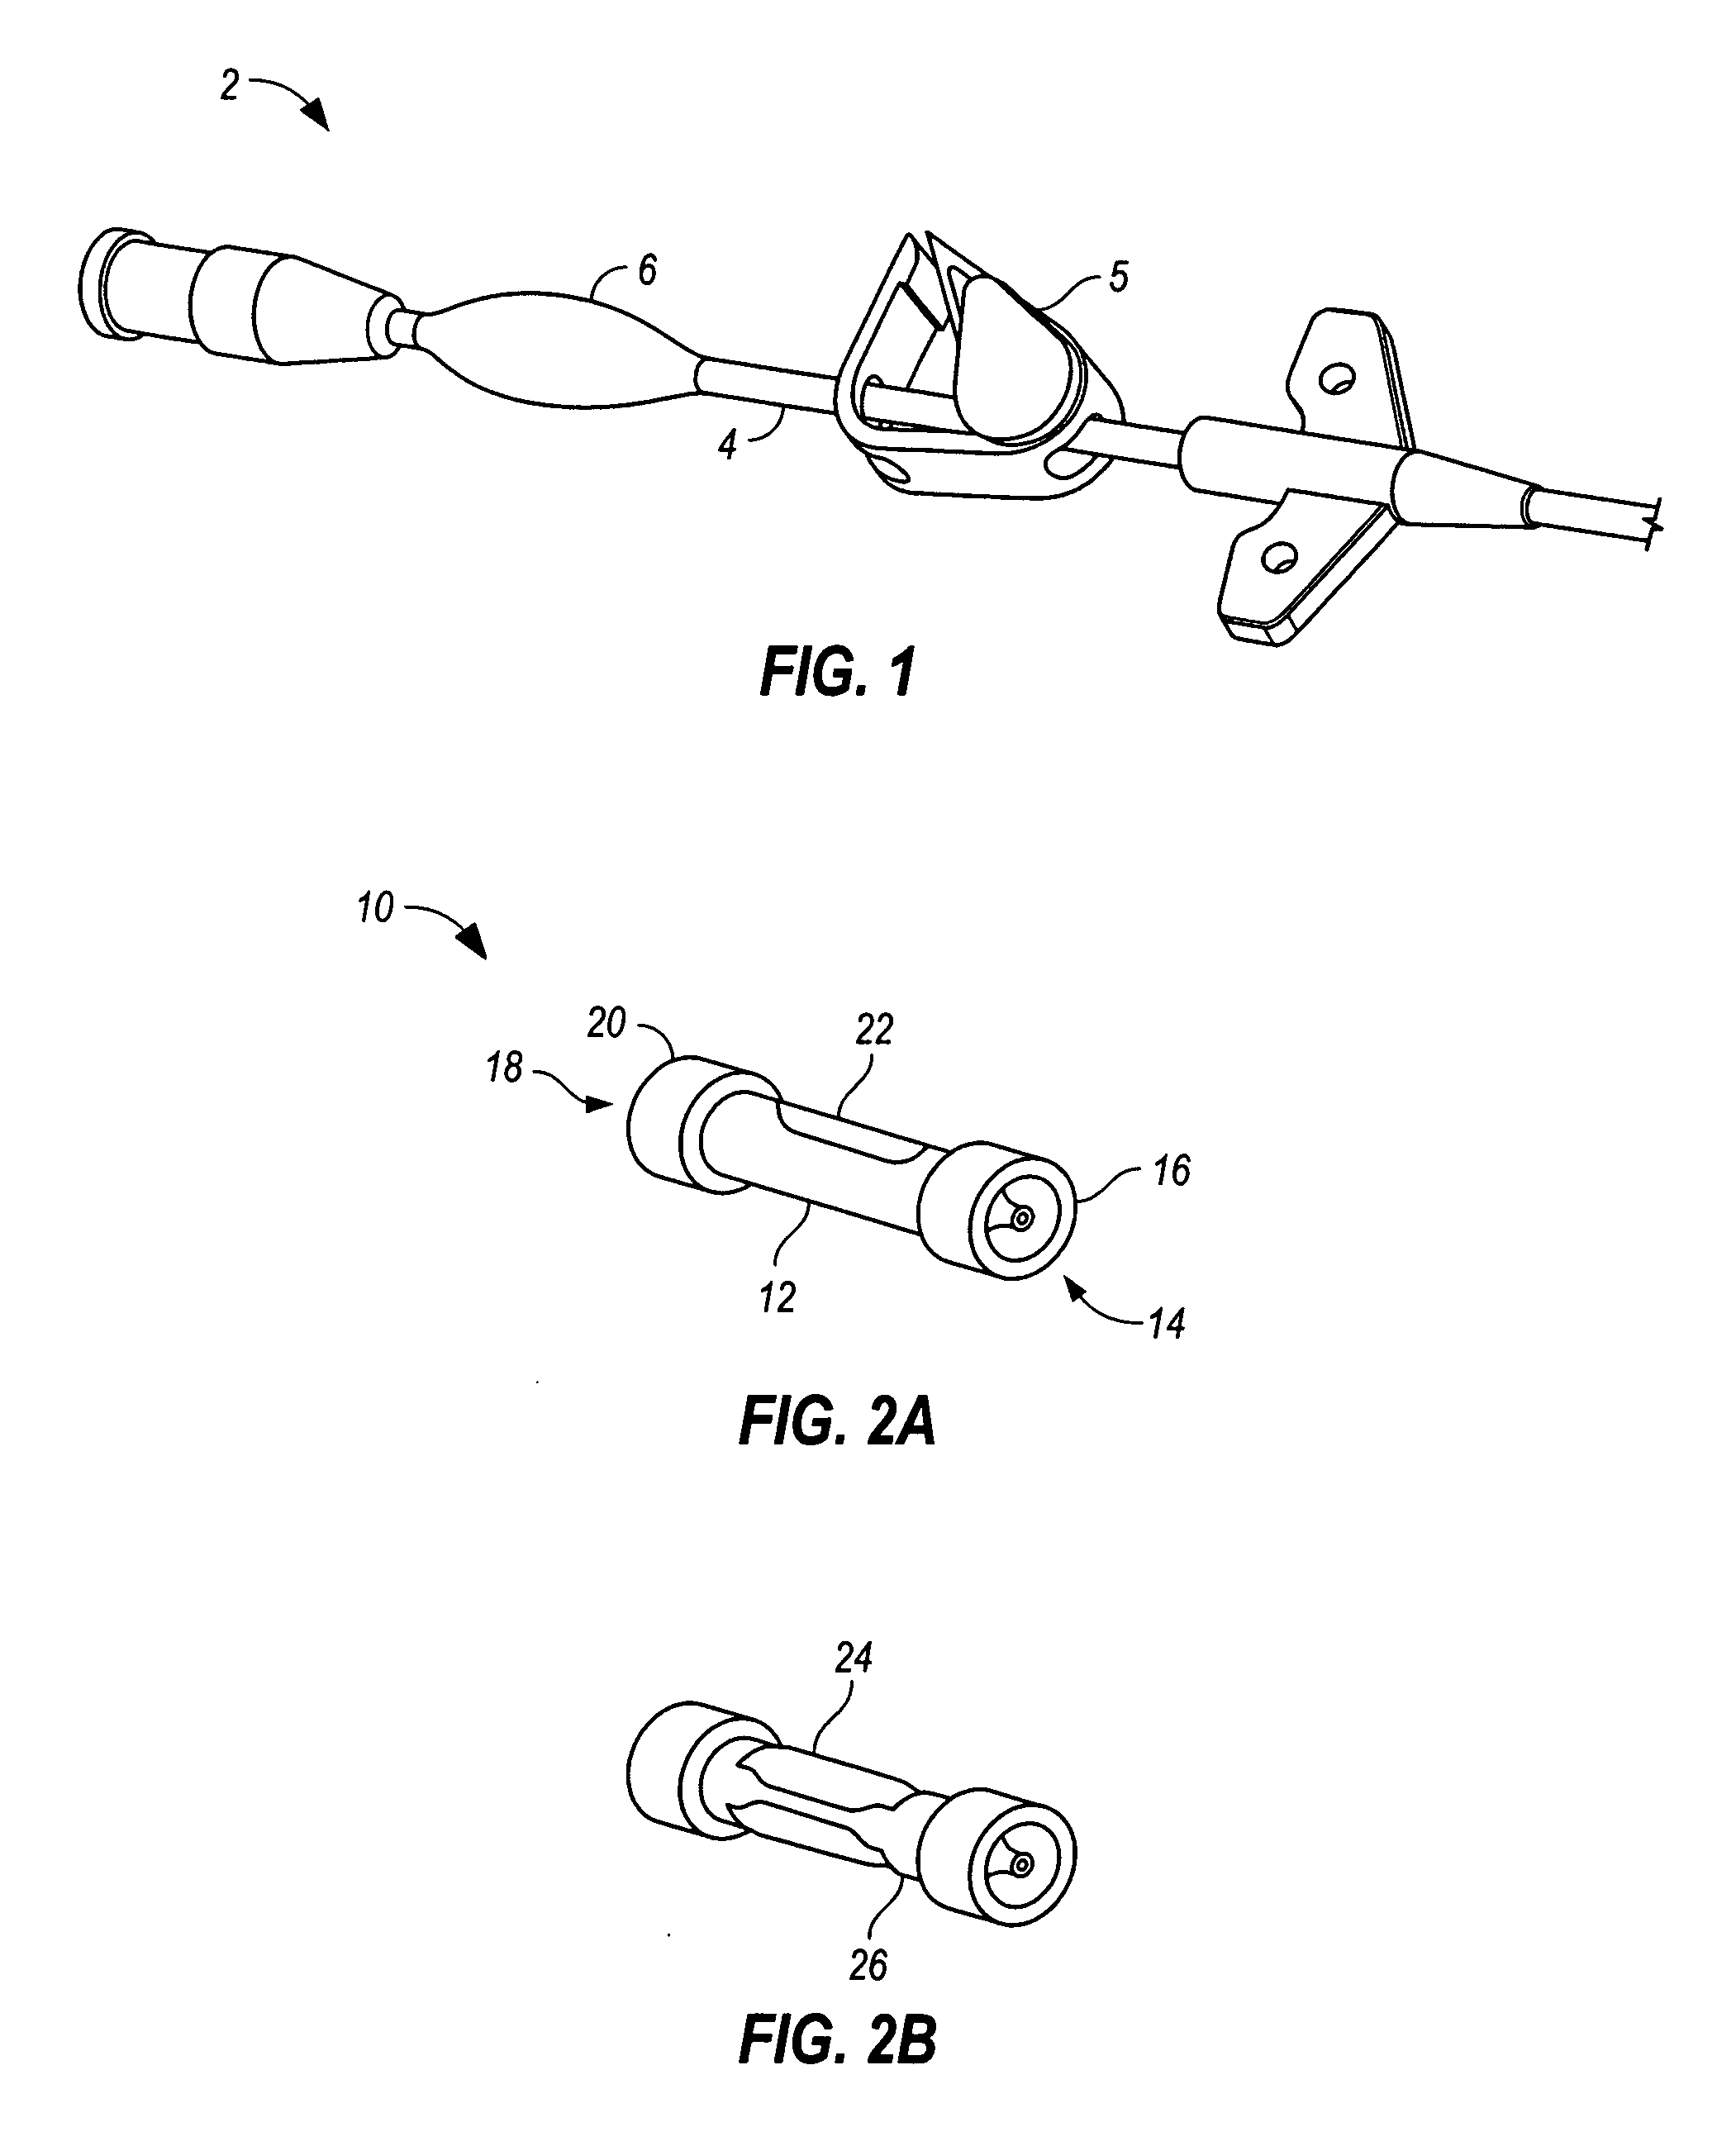 Power injection catheters and method of injecting